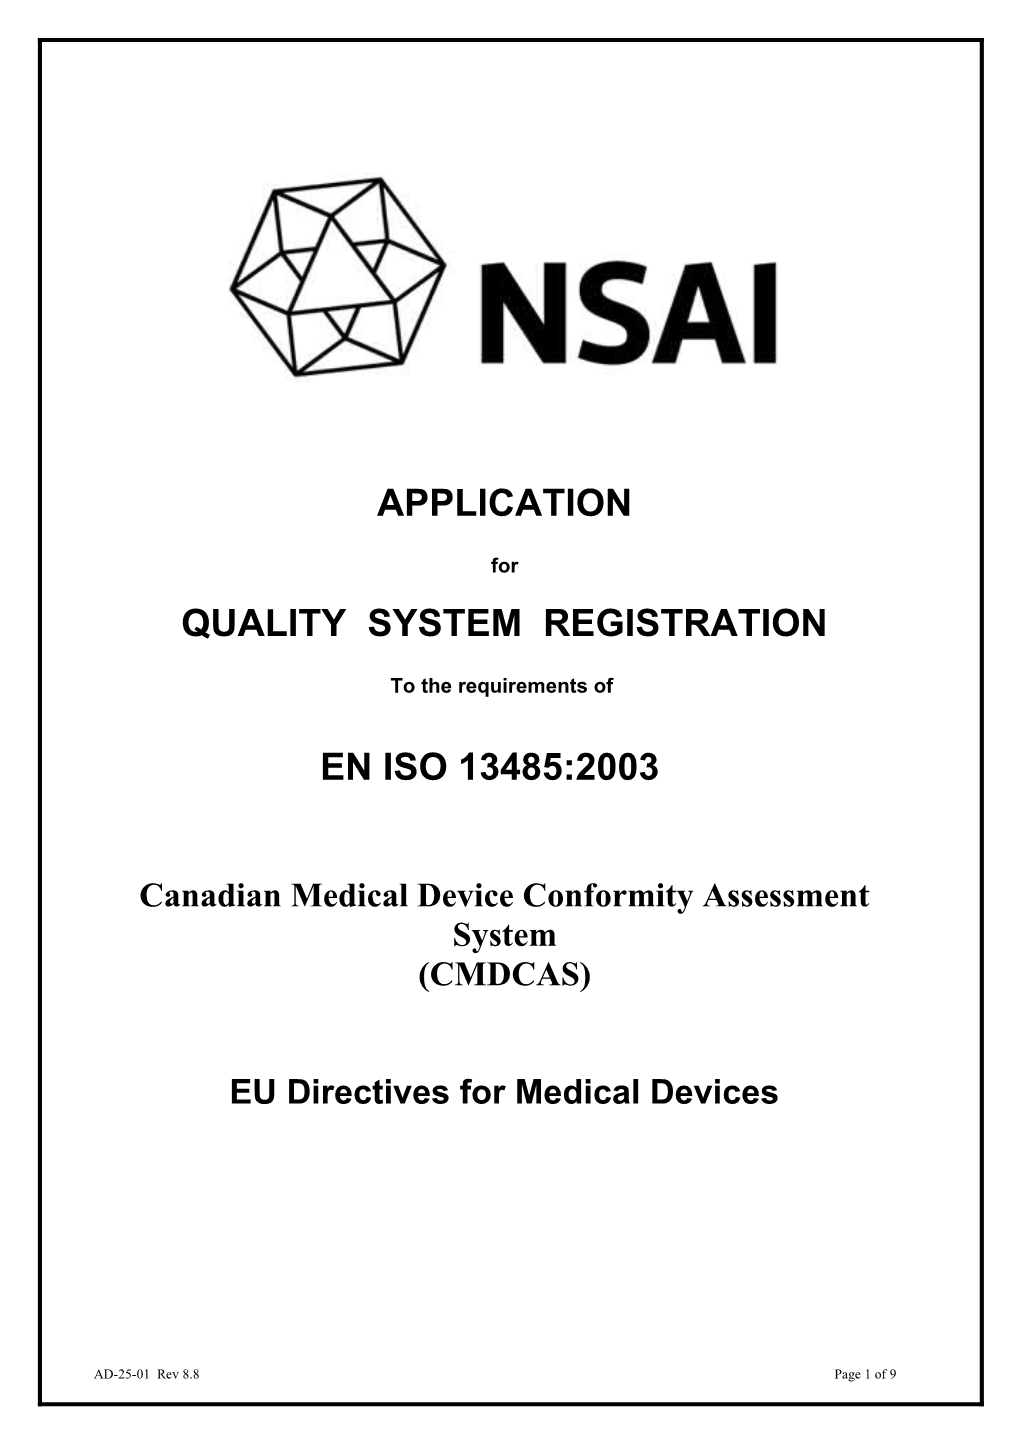 Canadian Medical Device Conformity Assessment System